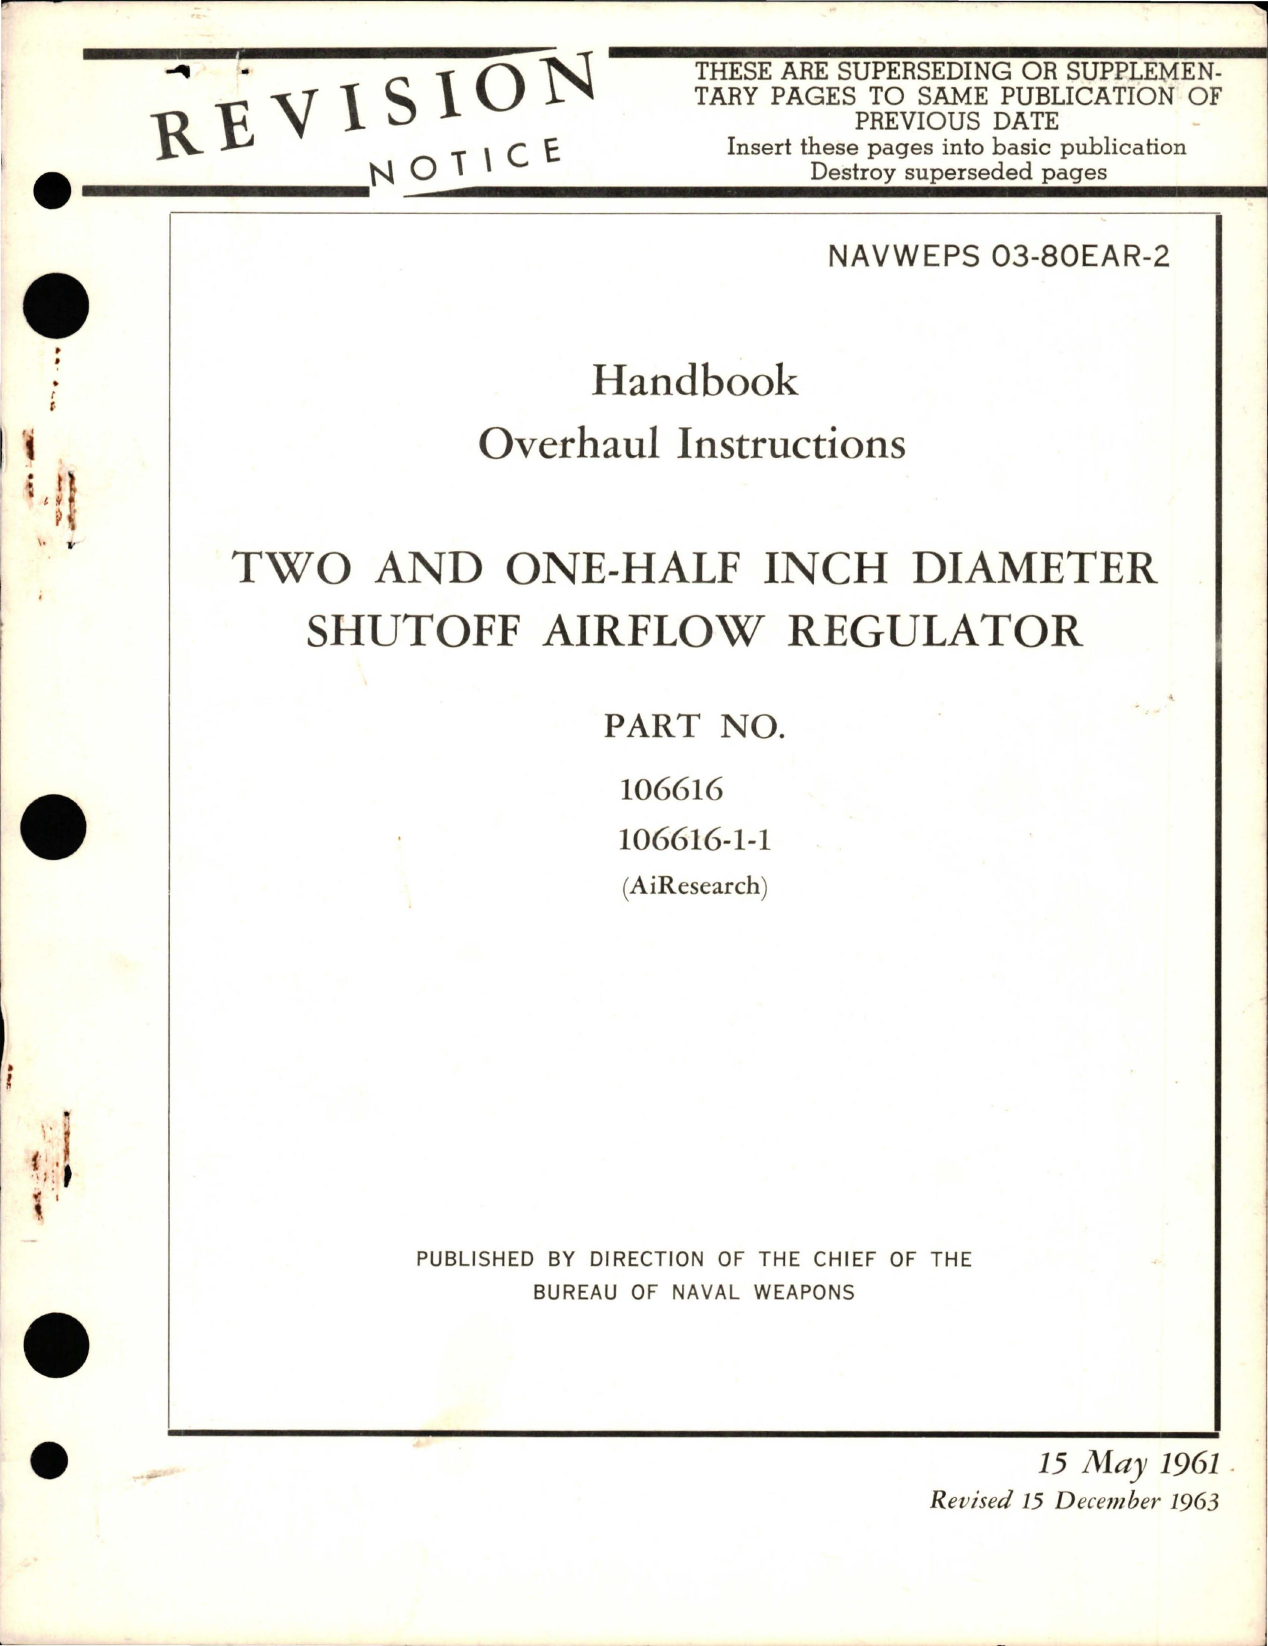 Sample page 1 from AirCorps Library document: Overhaul Instructions for Two and One-Half Inch Diameter Shutoff Airflow Regulator - Part 106616, 106616-1-1